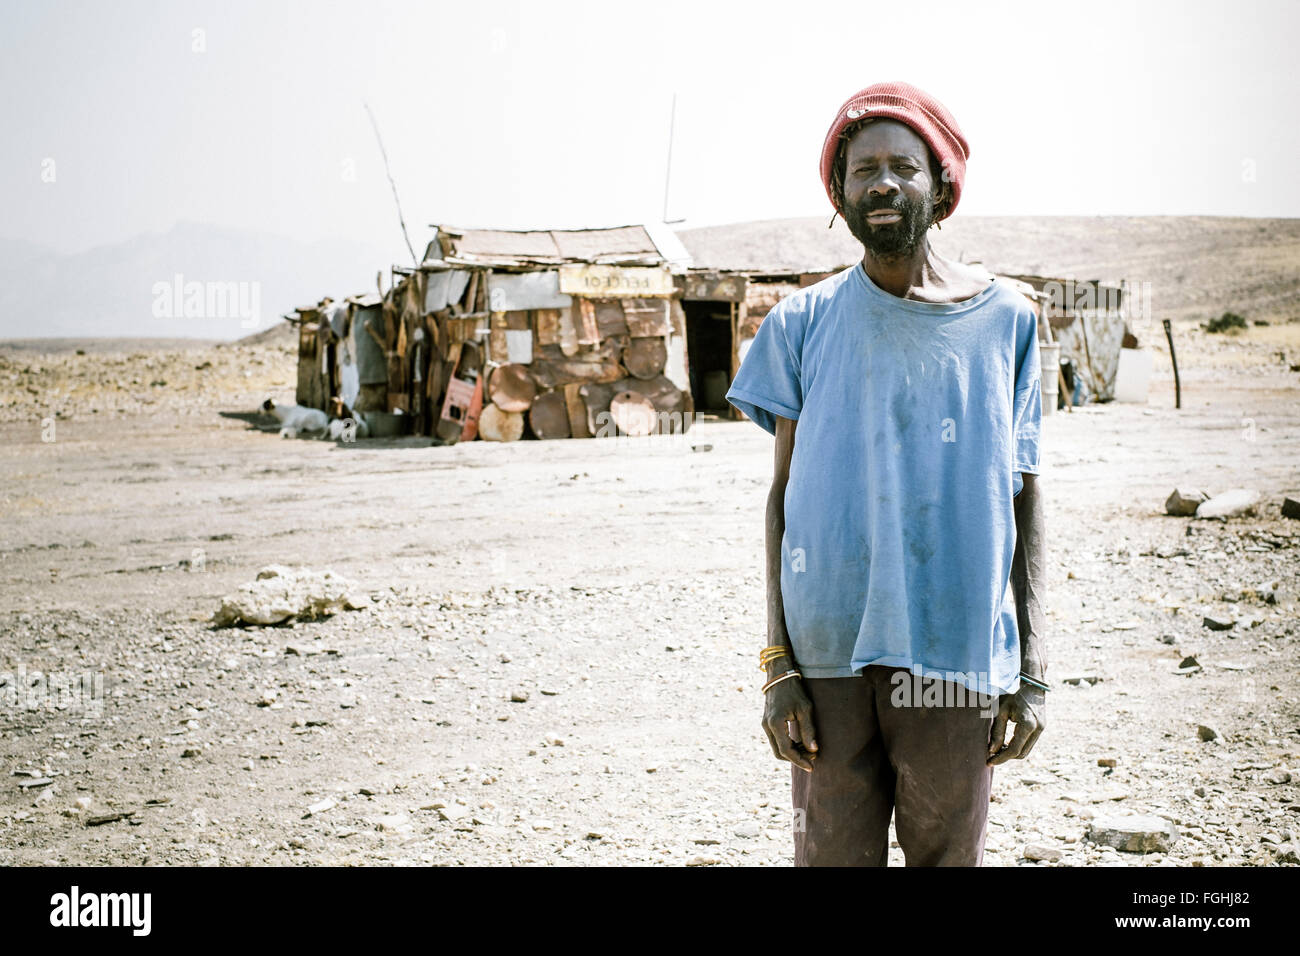 A man stands in front of his house in Namibia Stock Photo